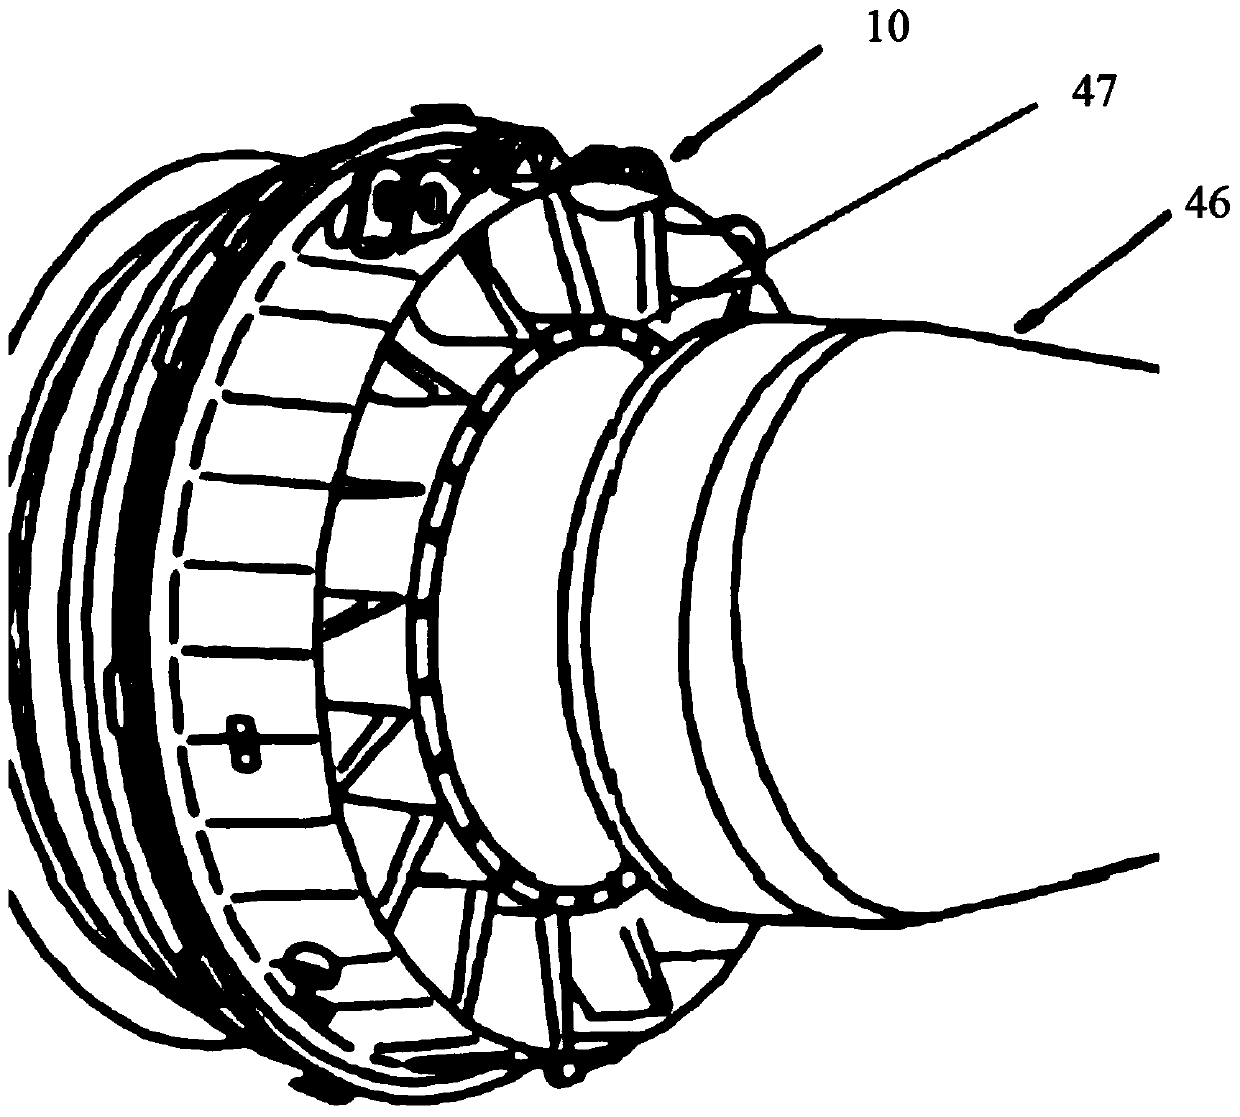 Connecting structure and exhaust system of aeroengine including the connecting structure